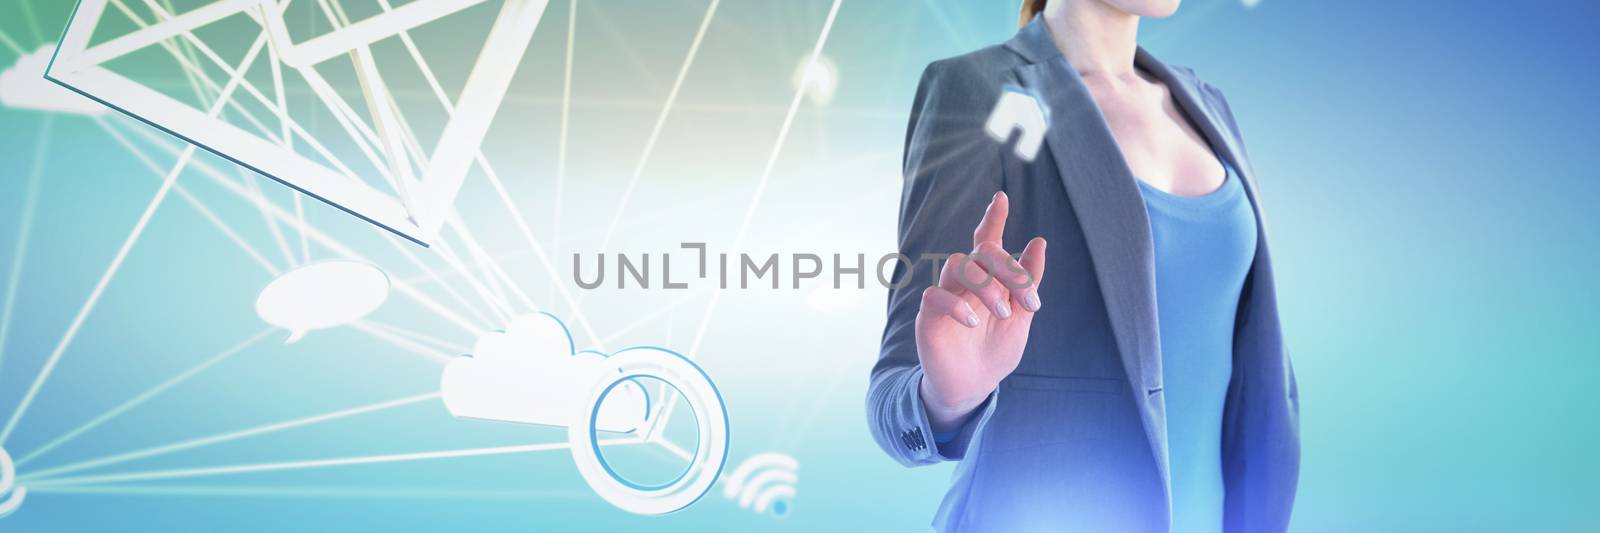 Composite image of mid section of businesswoman using imaginary interface by Wavebreakmedia